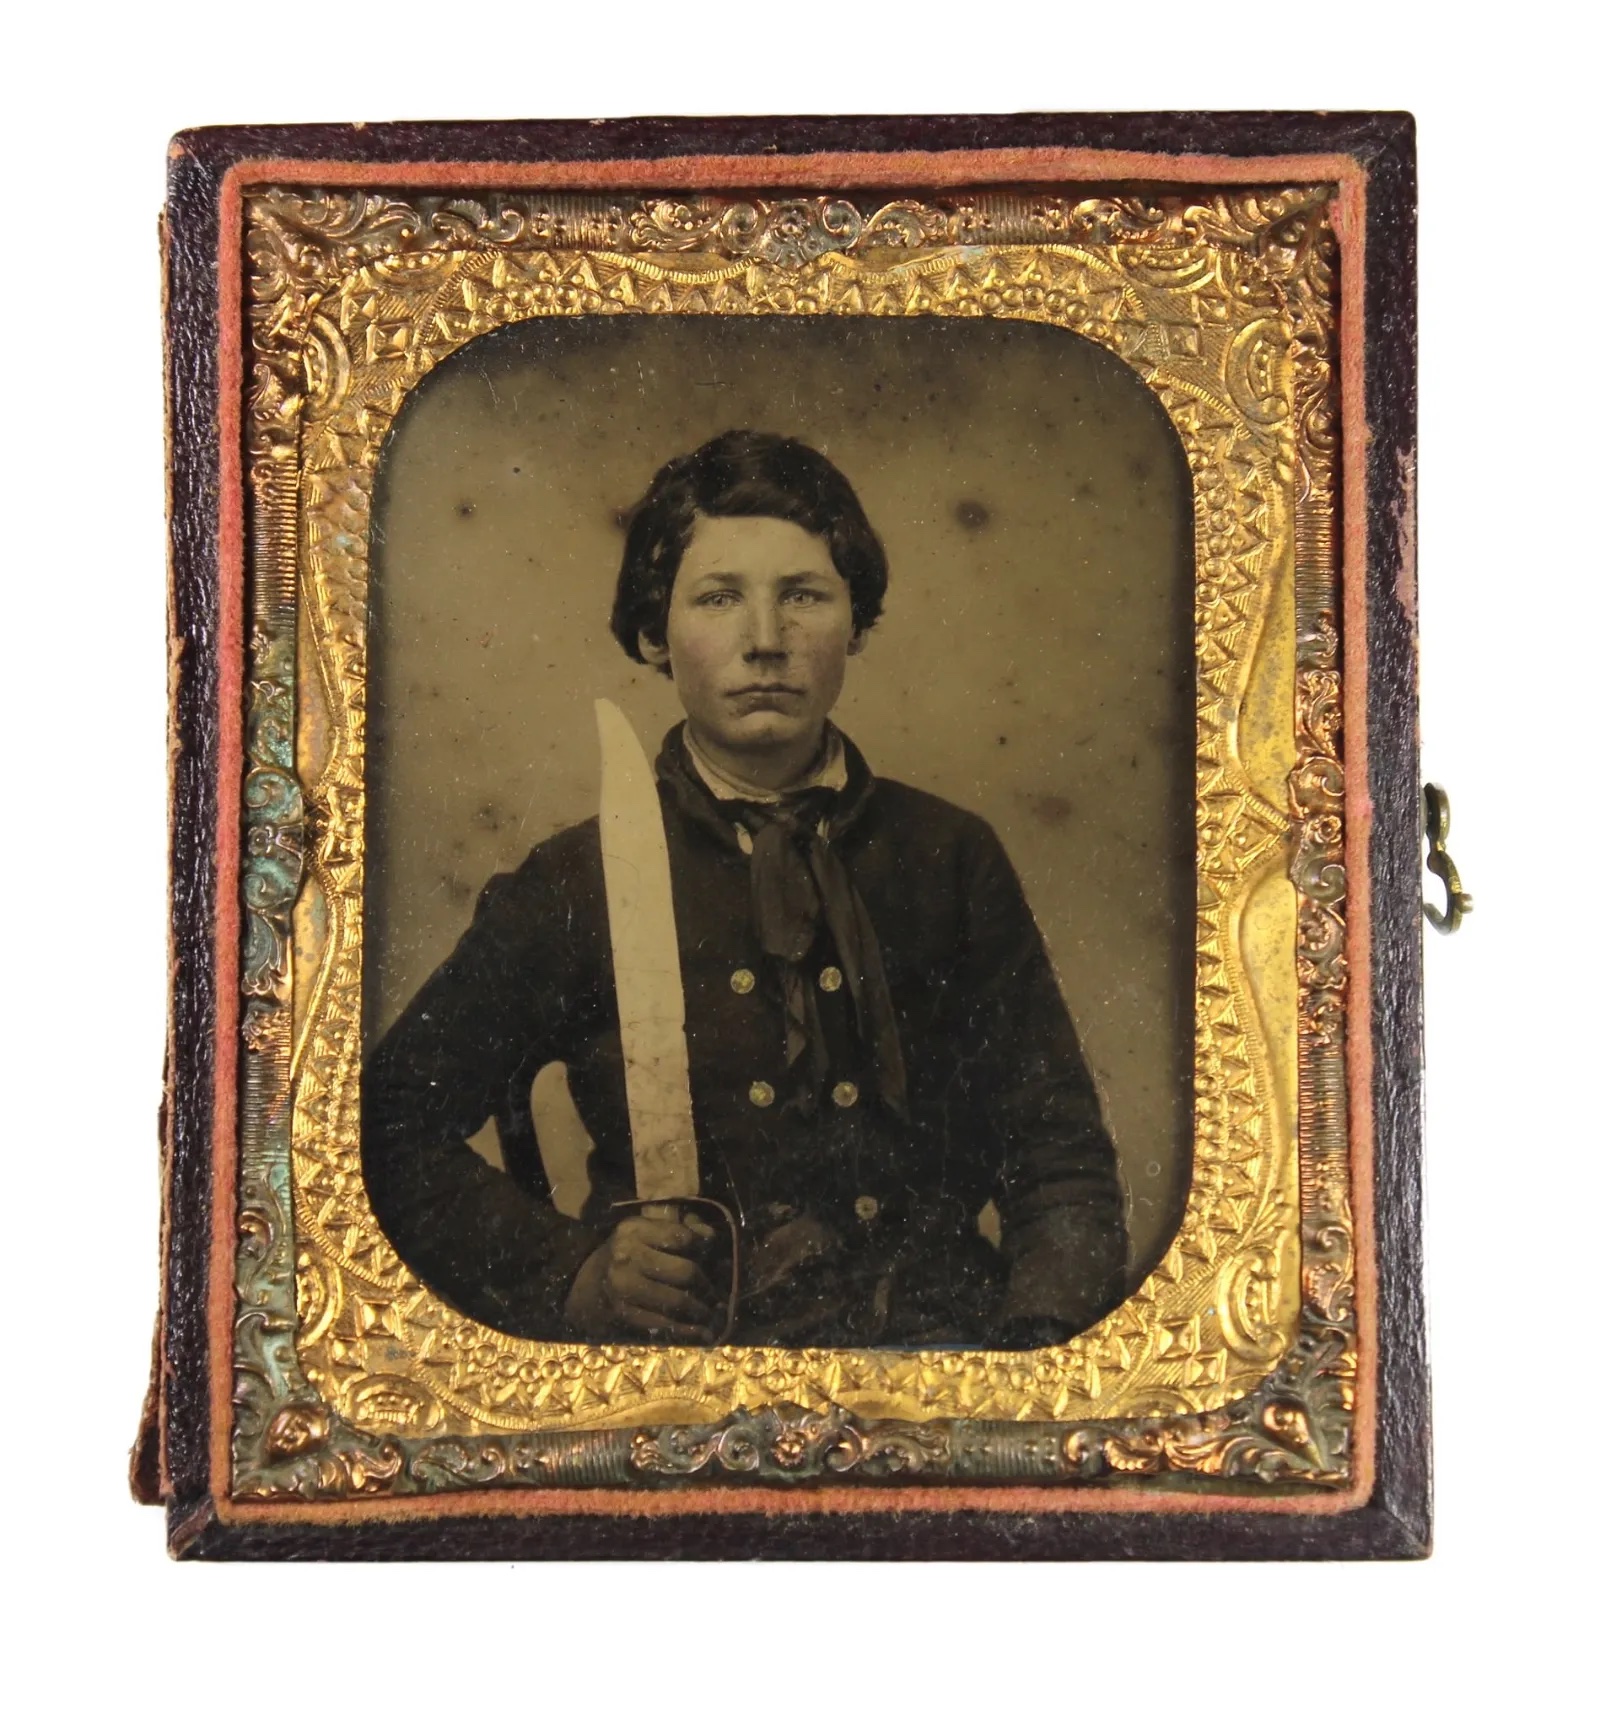 Ambrotype of school-aged Confederate wielding a Bowie knife, which sold for $16,000 ($19,680 with buyer’s premium) at Fleischer's.
